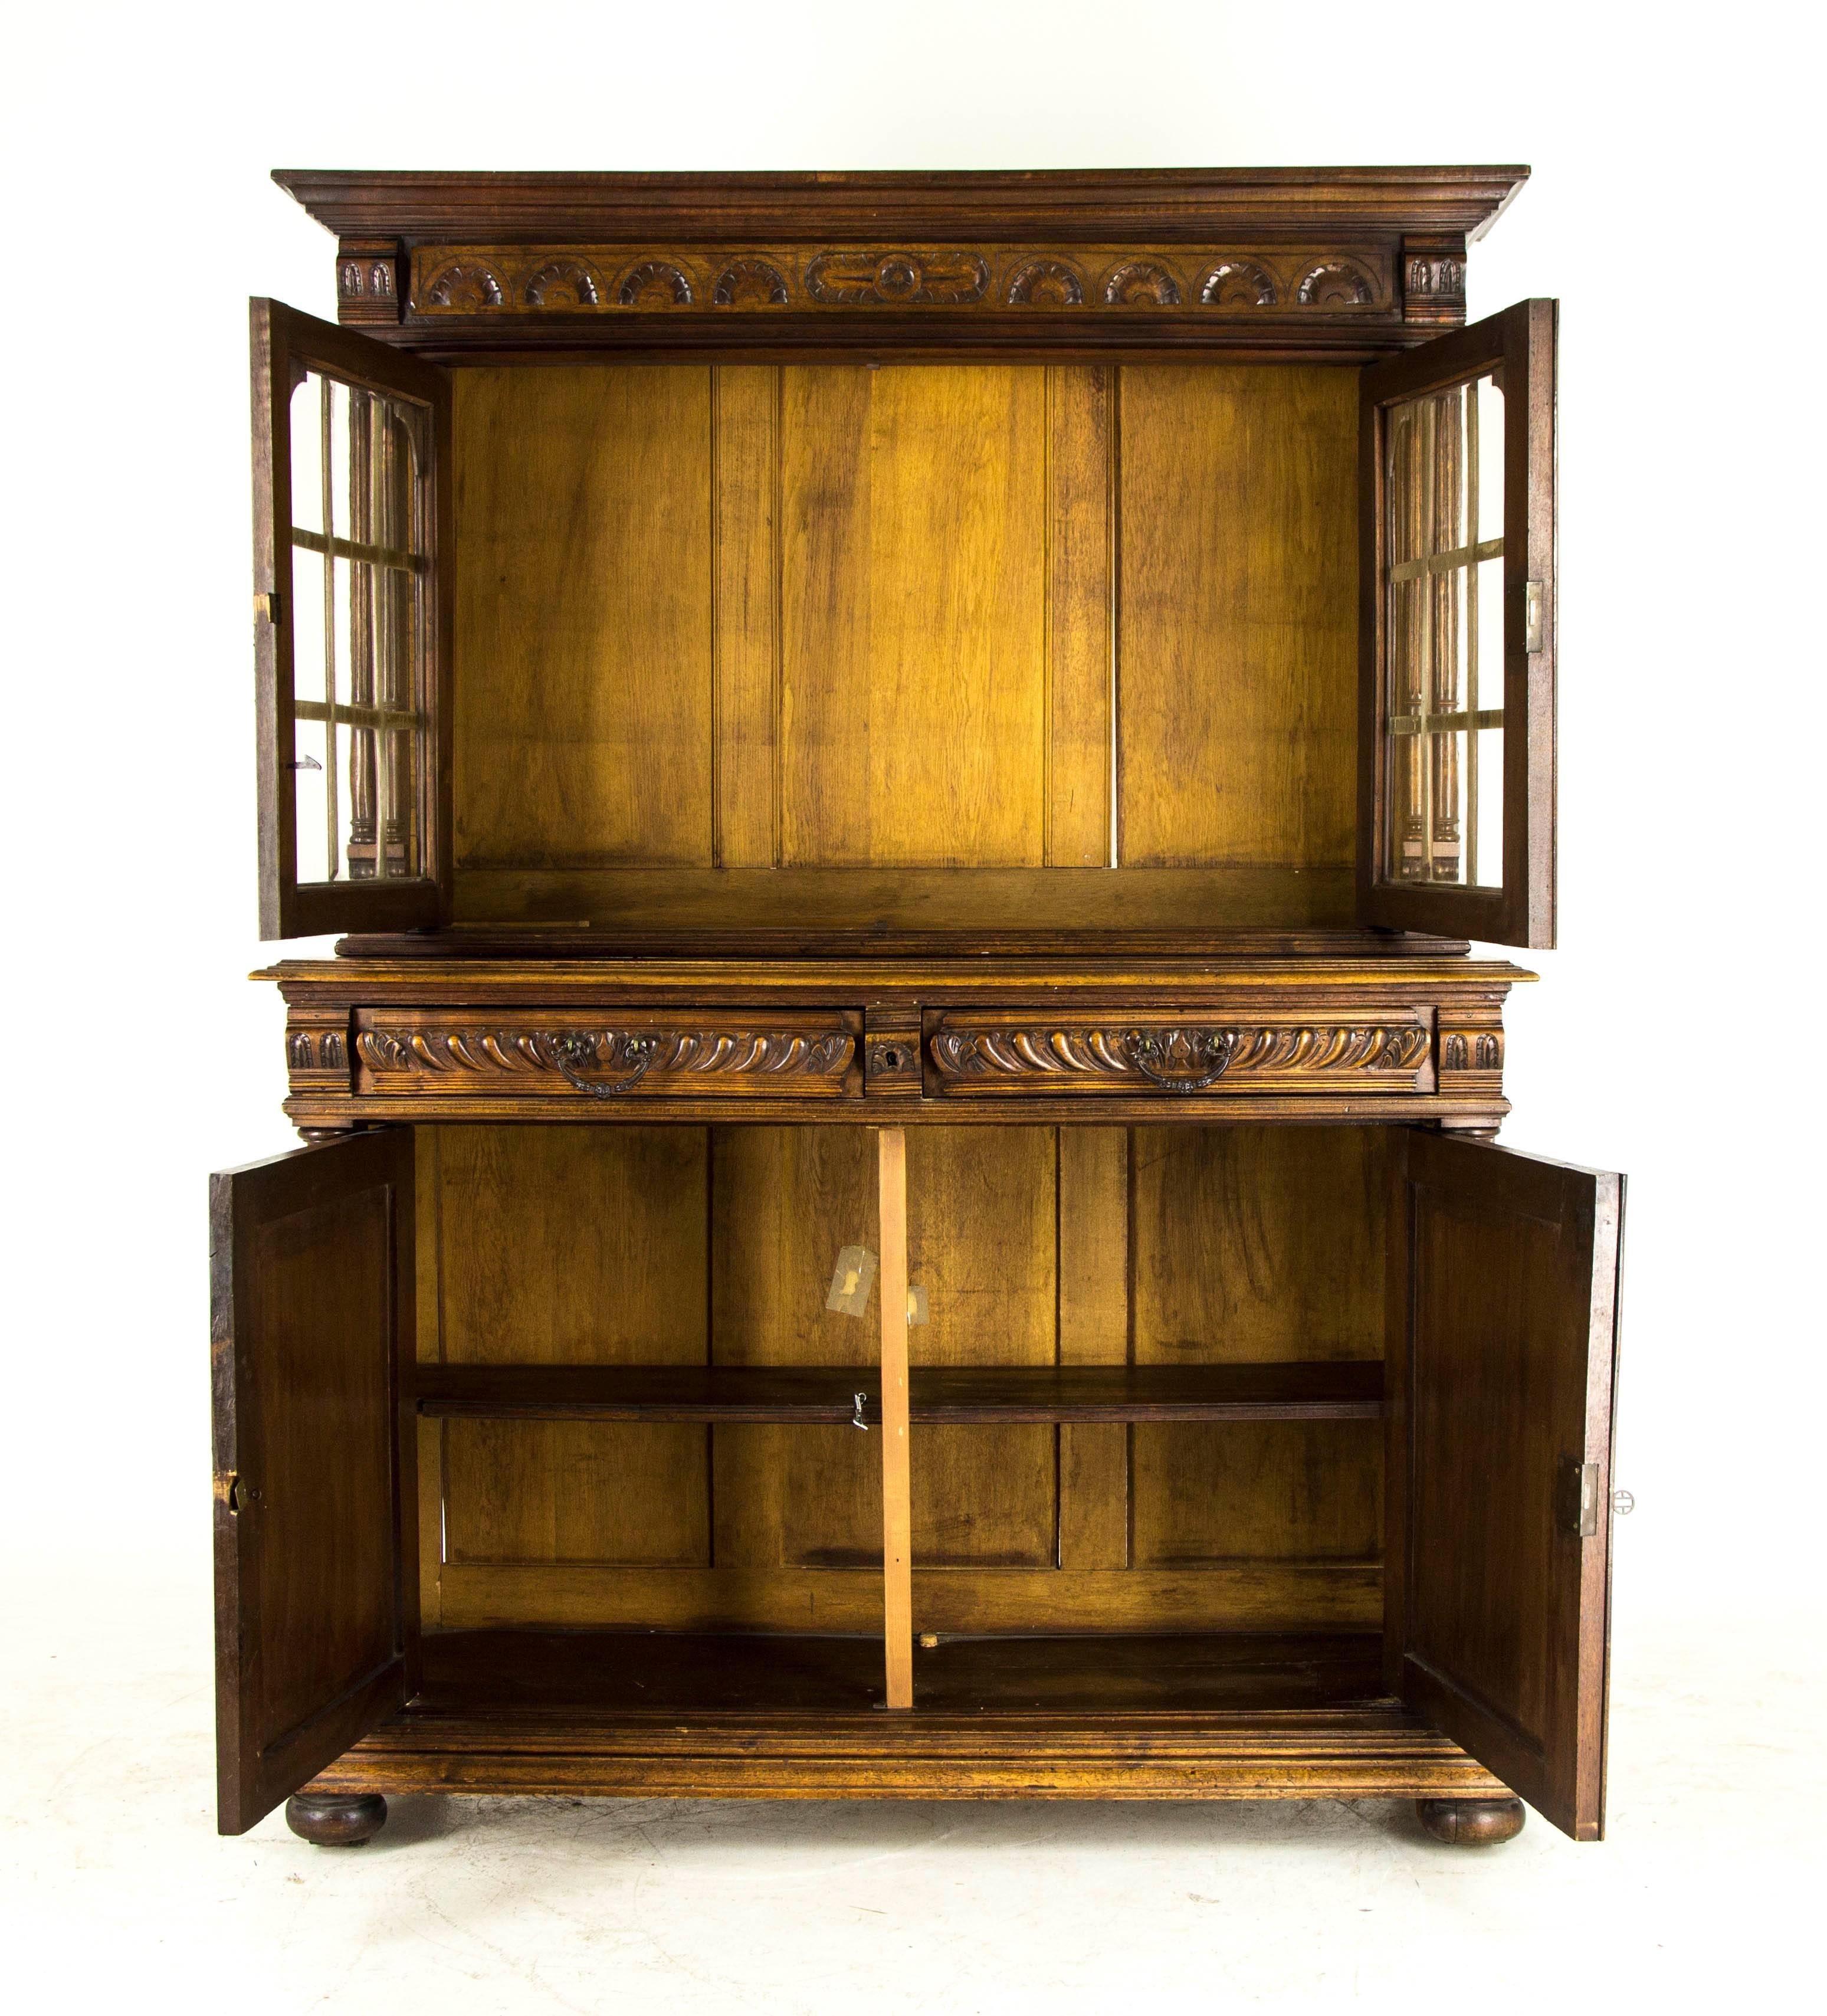 Hand-Crafted Antique French Hand-Carved Solid Walnut Buffet, Sideboard, Display Cabinet